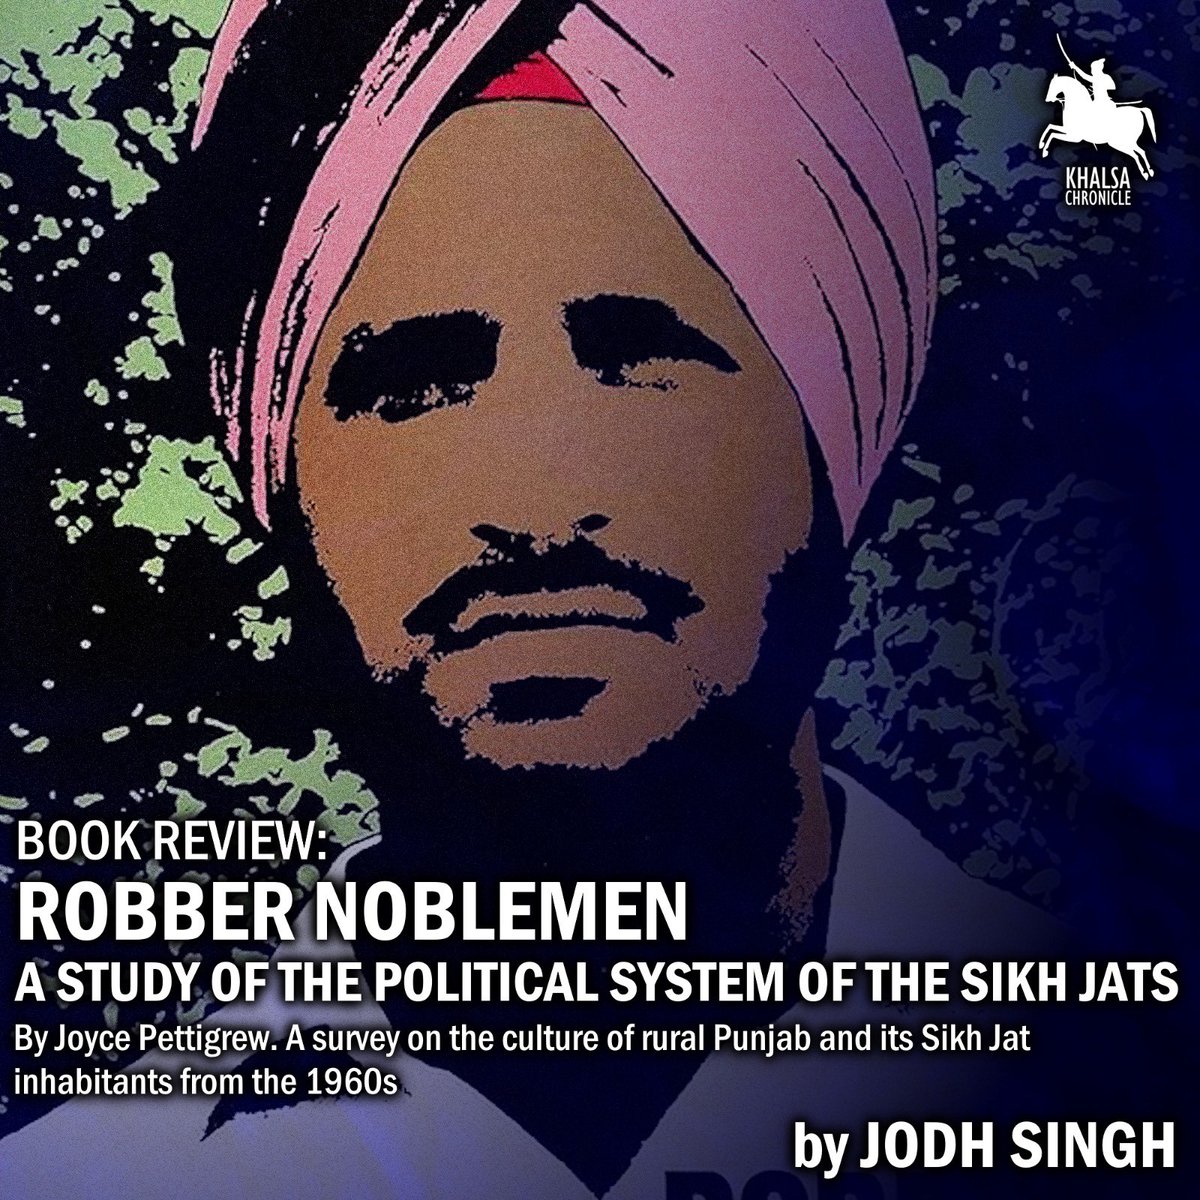 ‘Book Review: Robber Noblemen [Part I]’ by @YungBhujang. A survey on the culture of rural Punjab and its Sikh Jat inhabitants from the 1960s. 🔗 khalsachronicle.substack.com/p/book-review-…